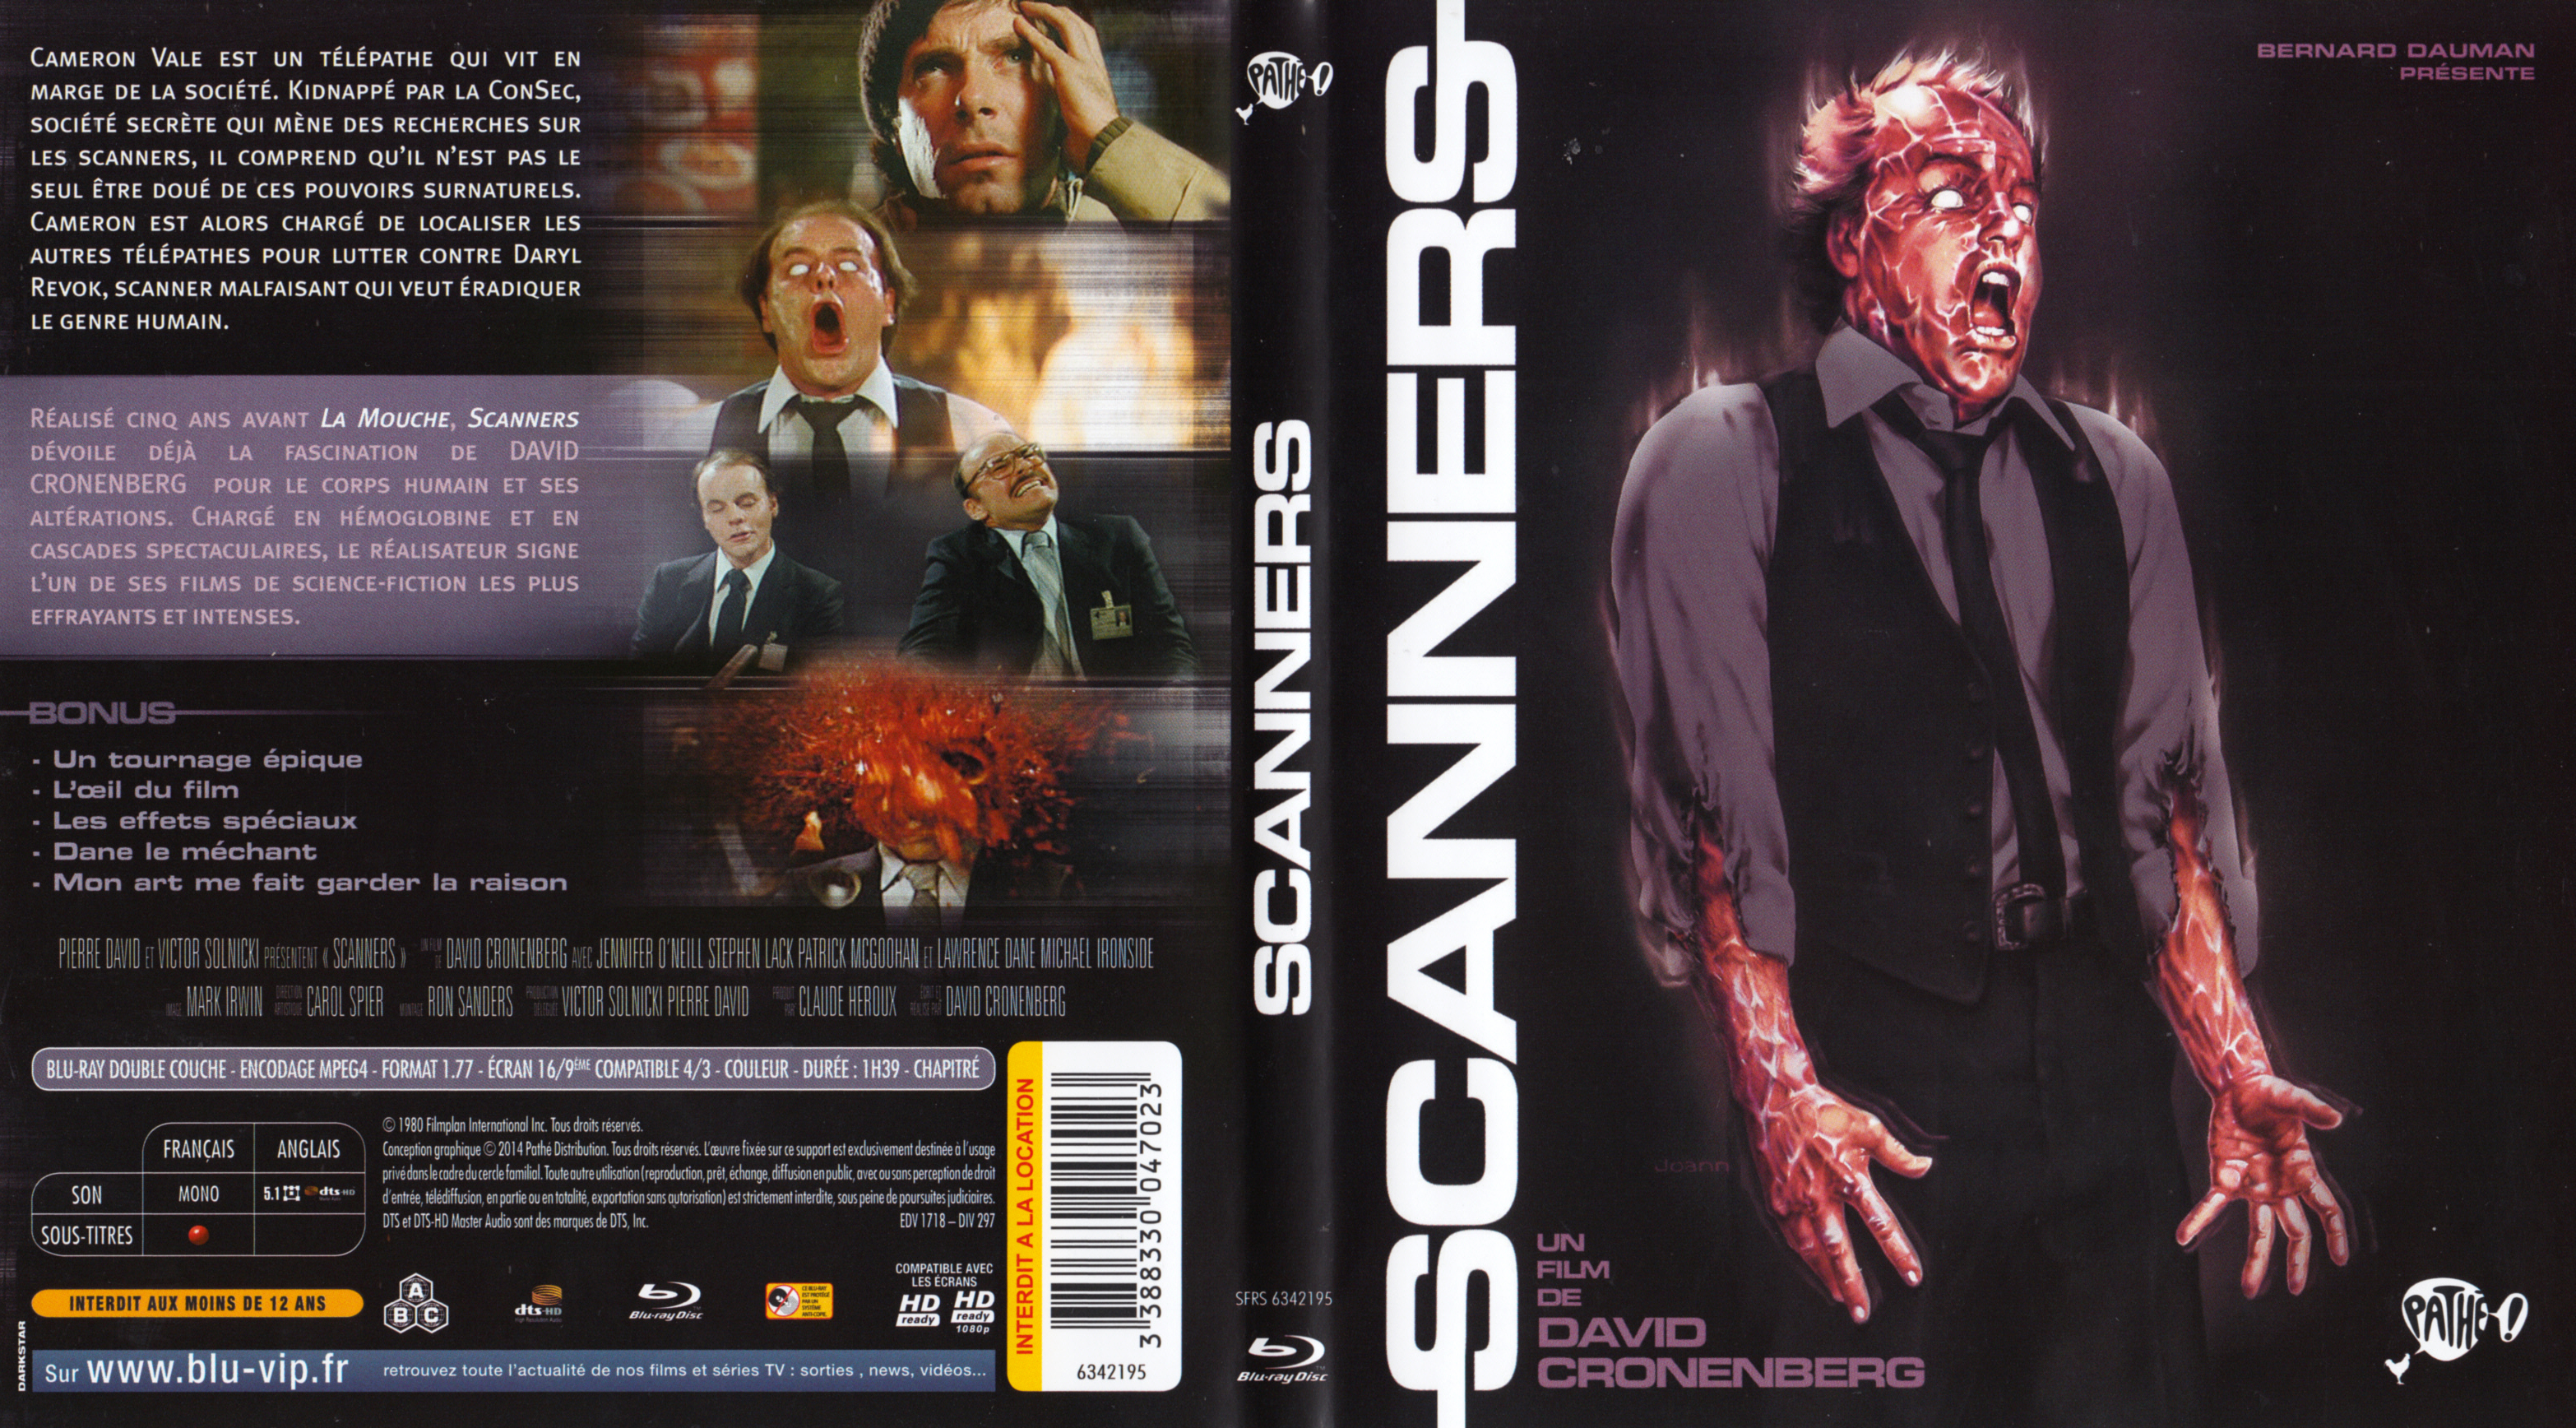 Jaquette DVD Scanners (BLU-RAY)